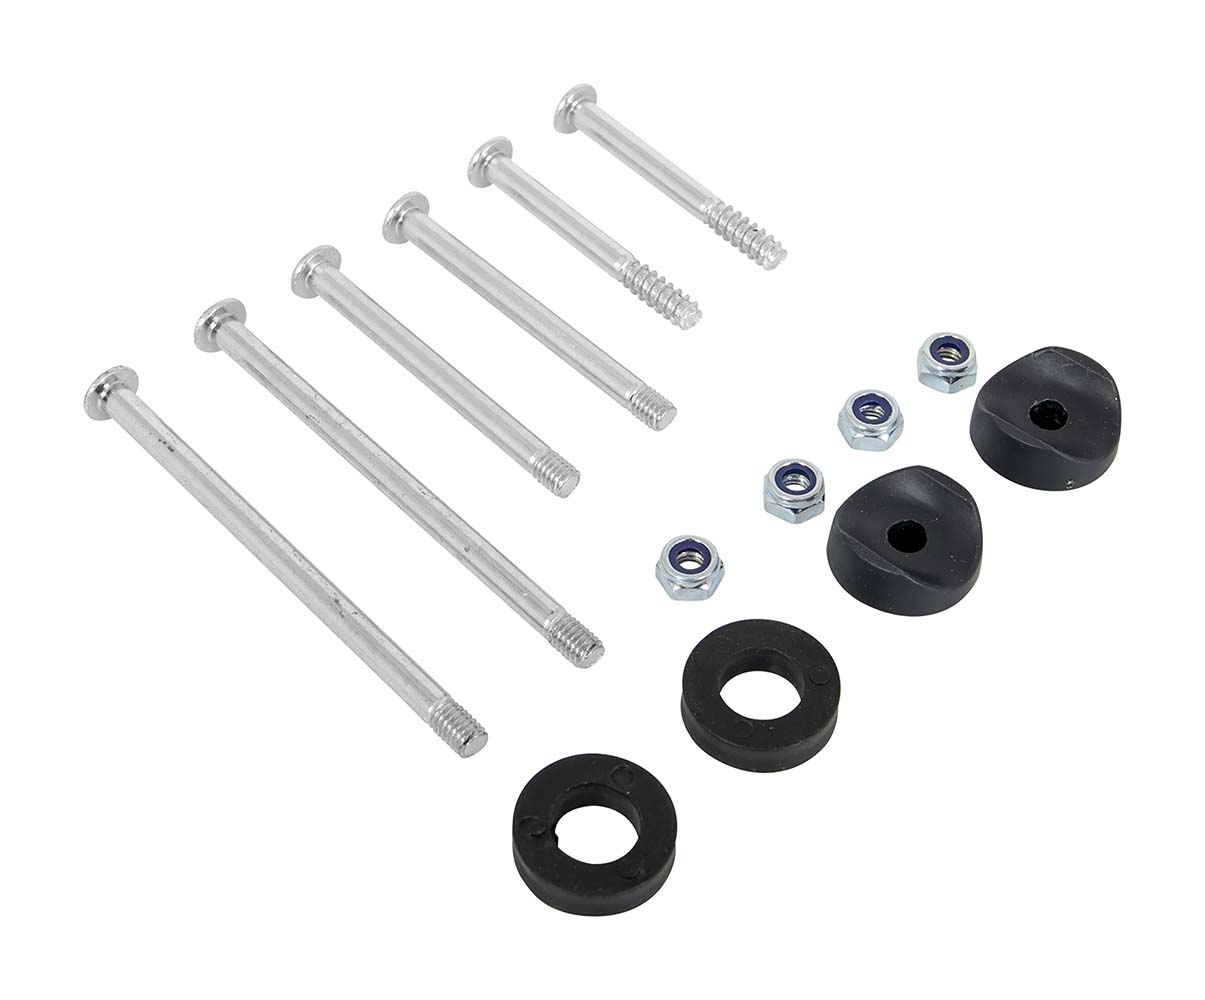 1164018 A complete set of screws for the Crespo 237 camping chairs.